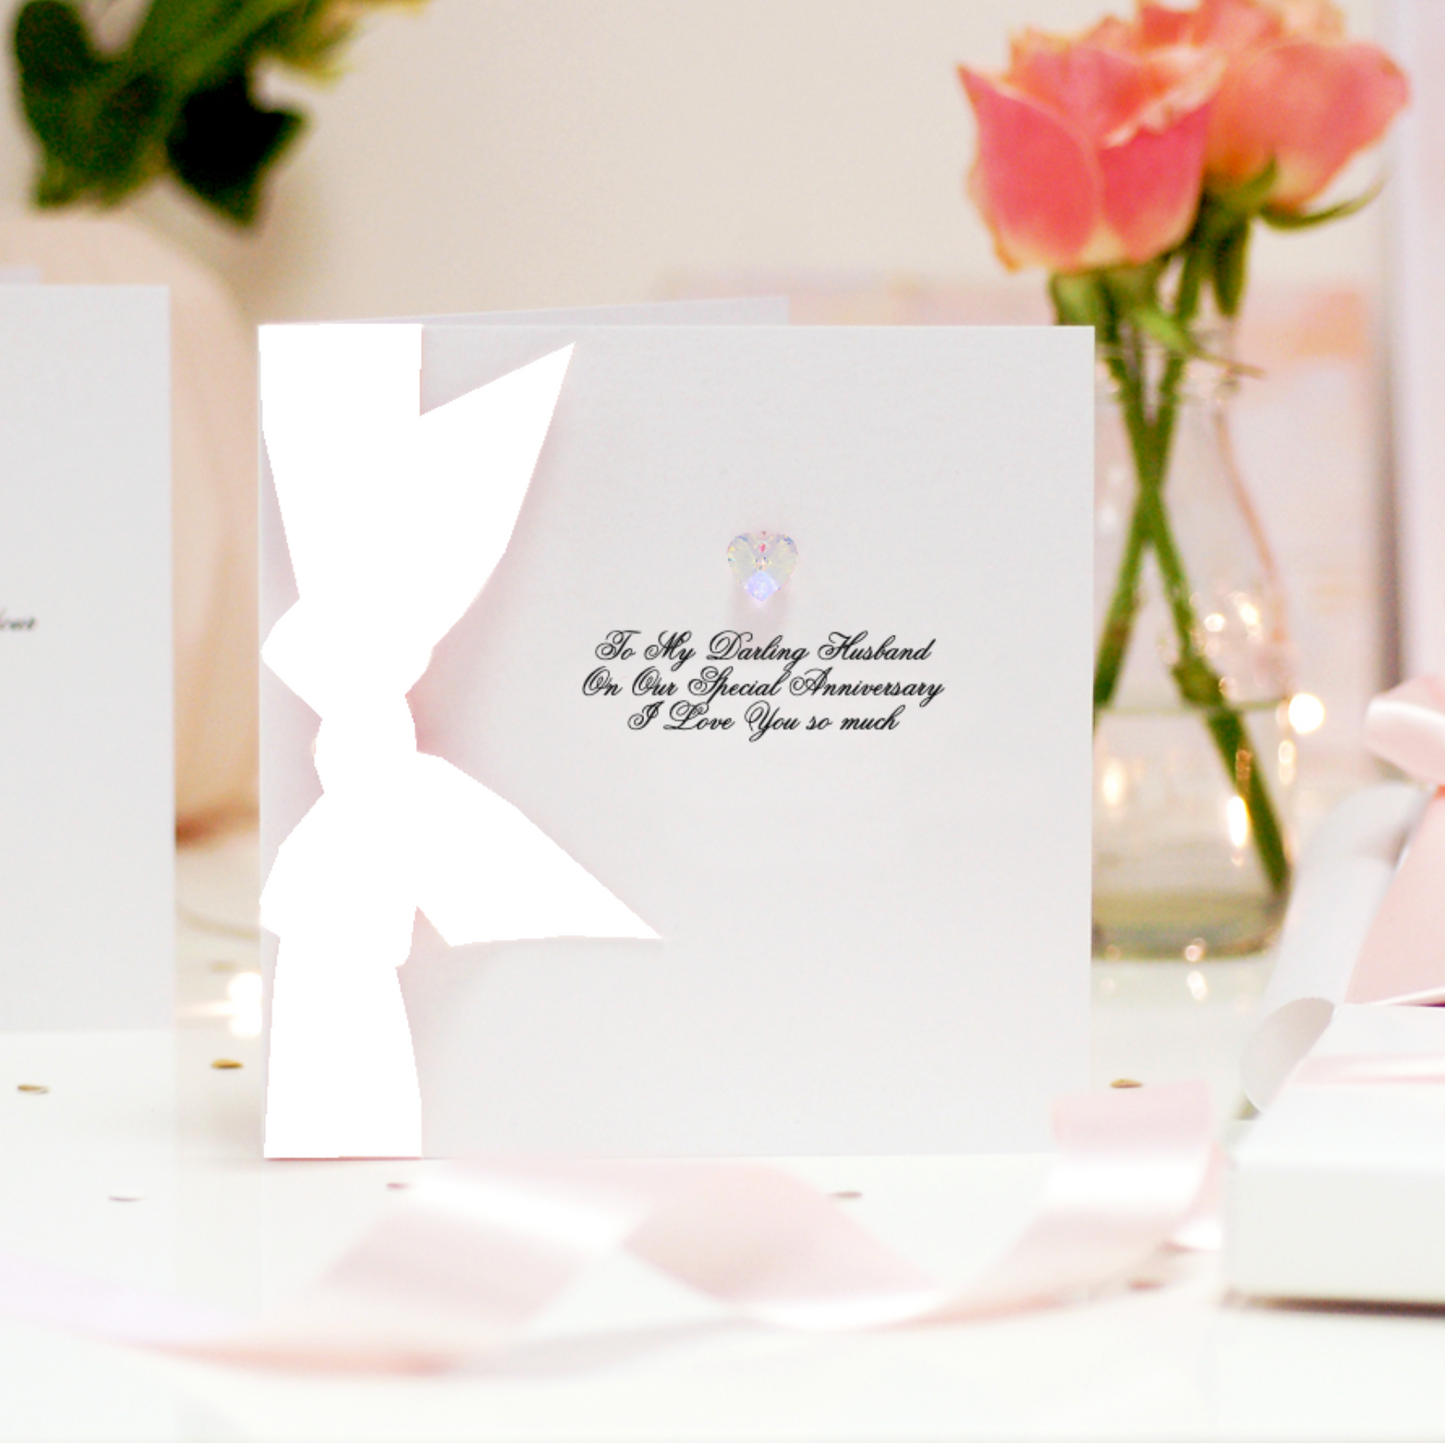 Personalsied anniversary cards husband | The Luxe Co